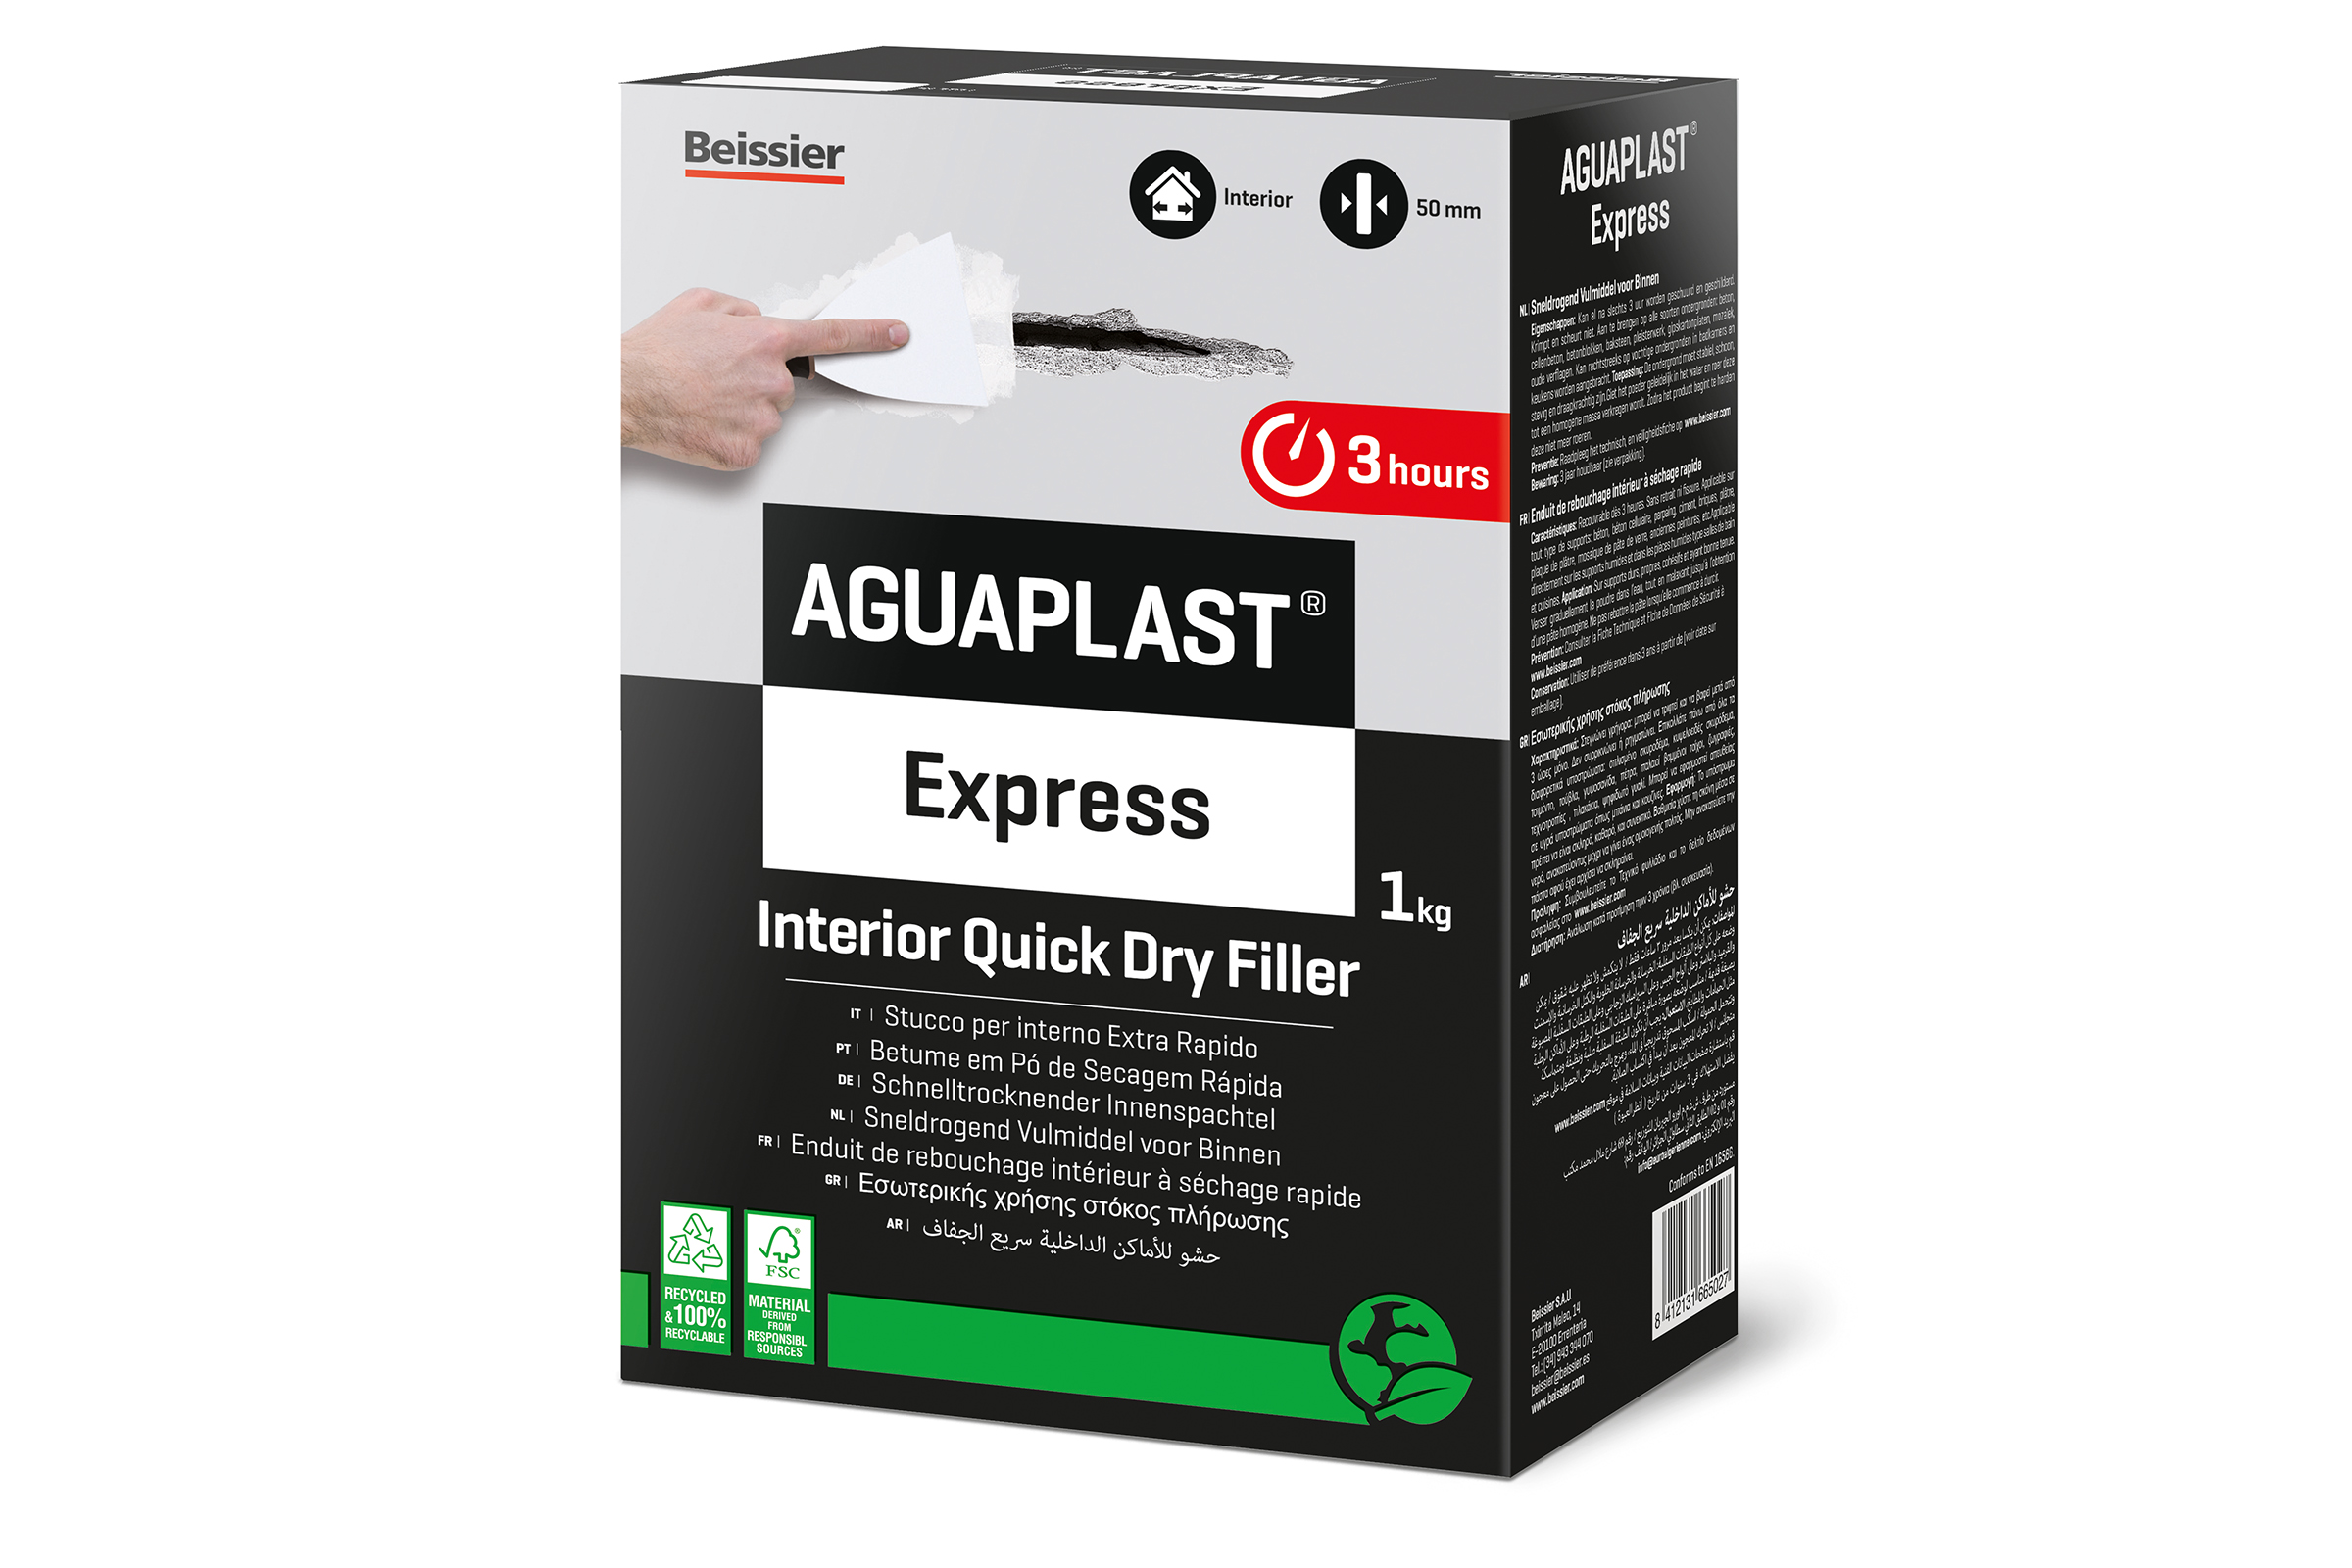 Compare prices for AGUAPLAST across all European  stores